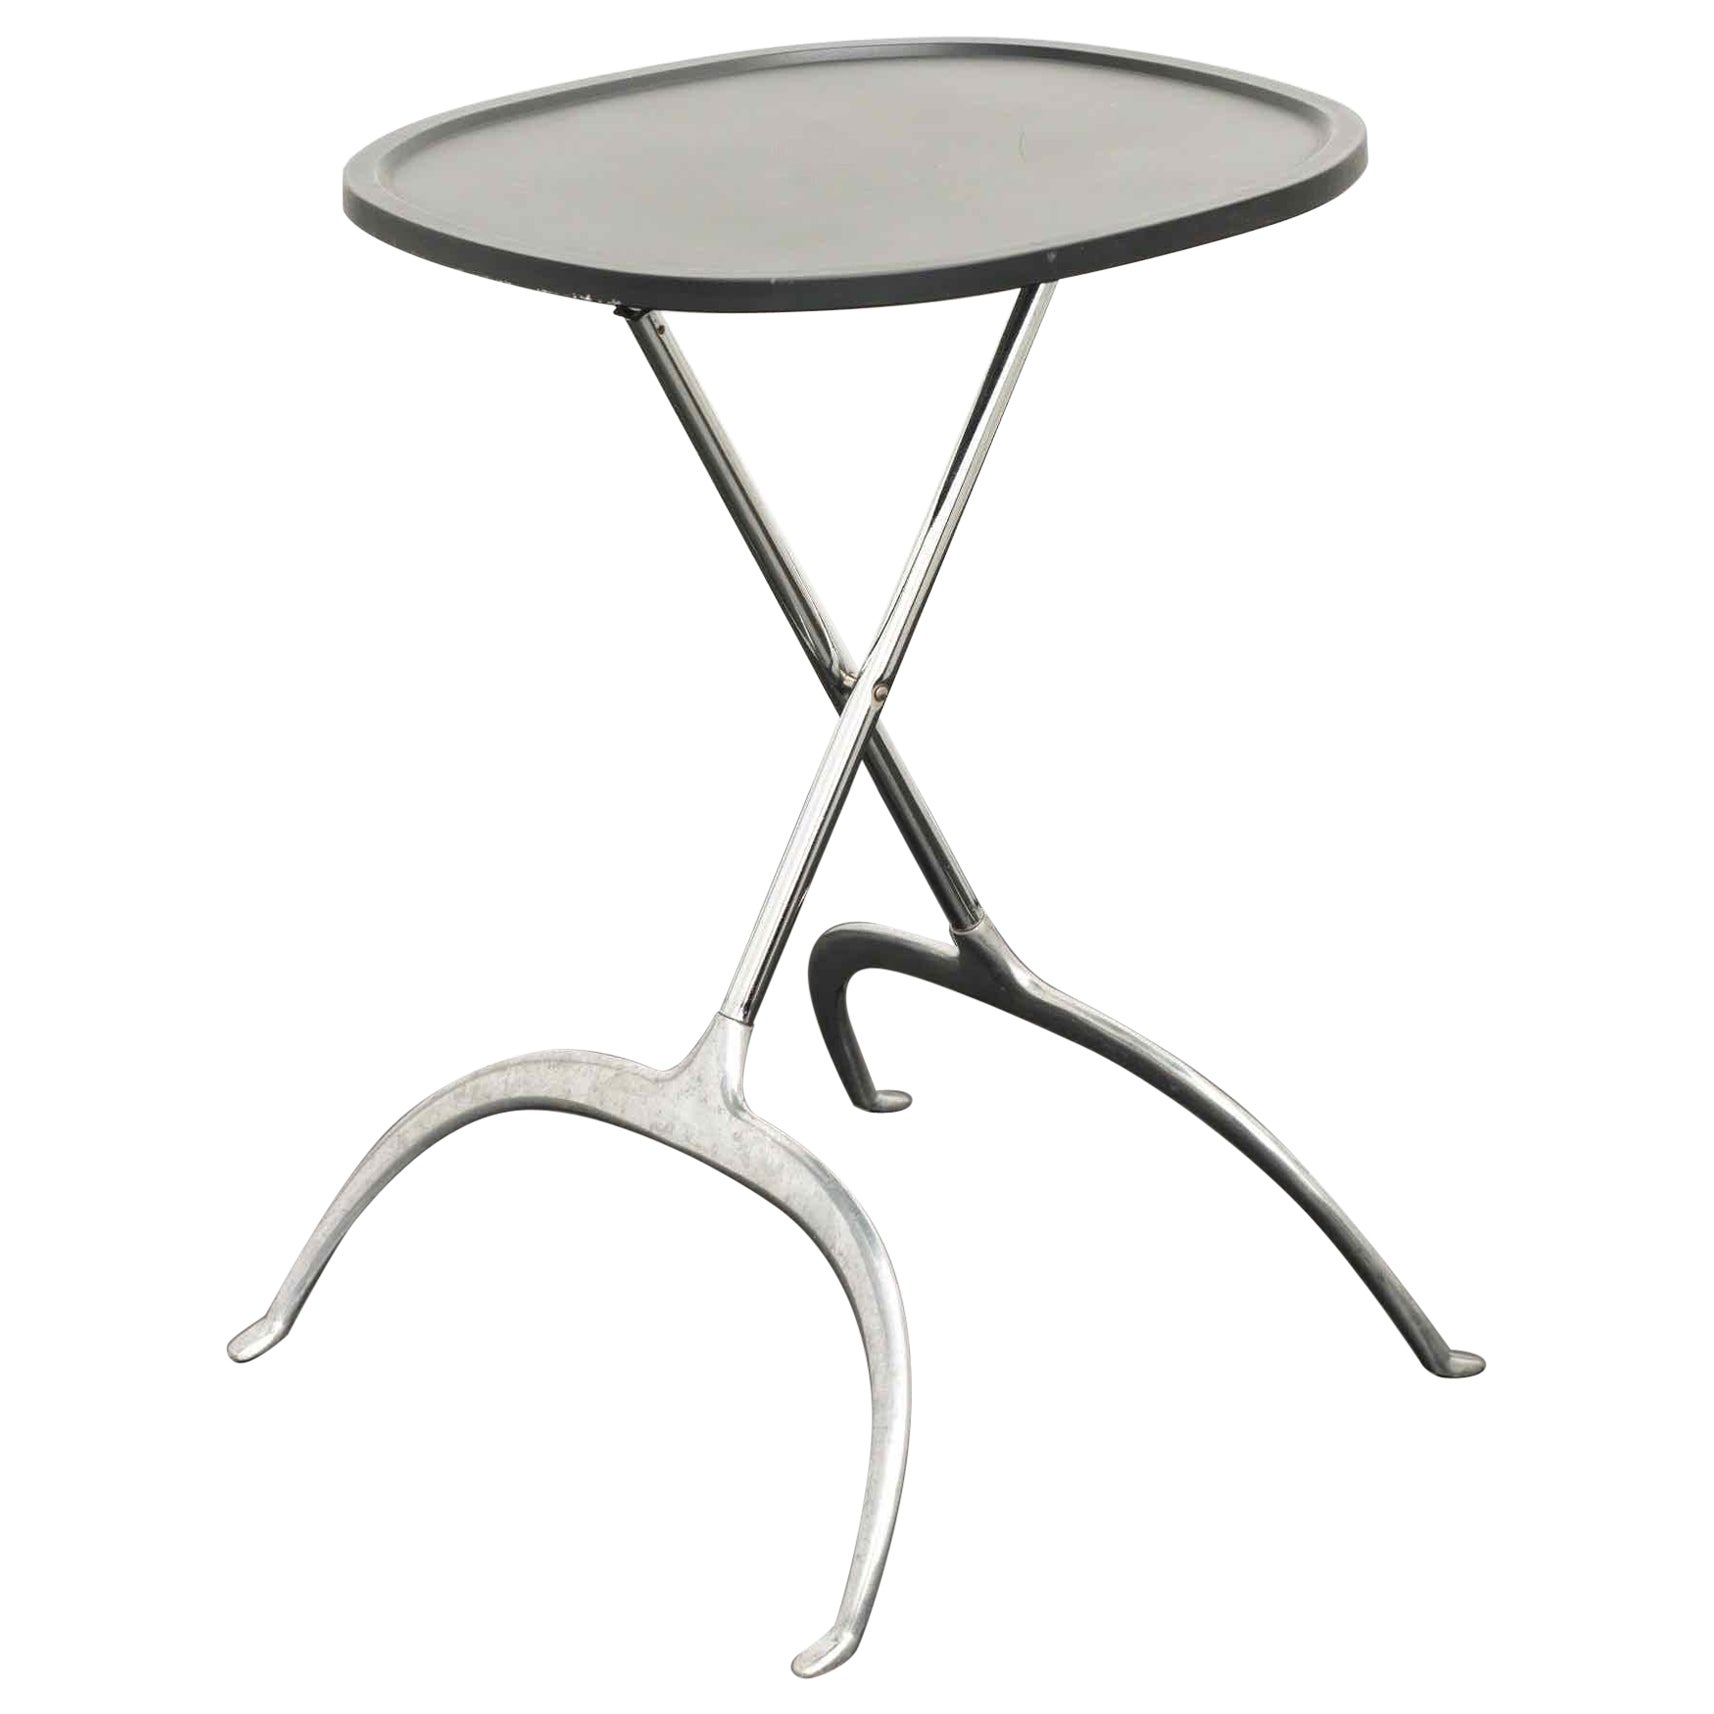 Kartell 'Leopoldo' folding table by Antonio Citterio and Glen Oliver Löw, 19990s For Sale